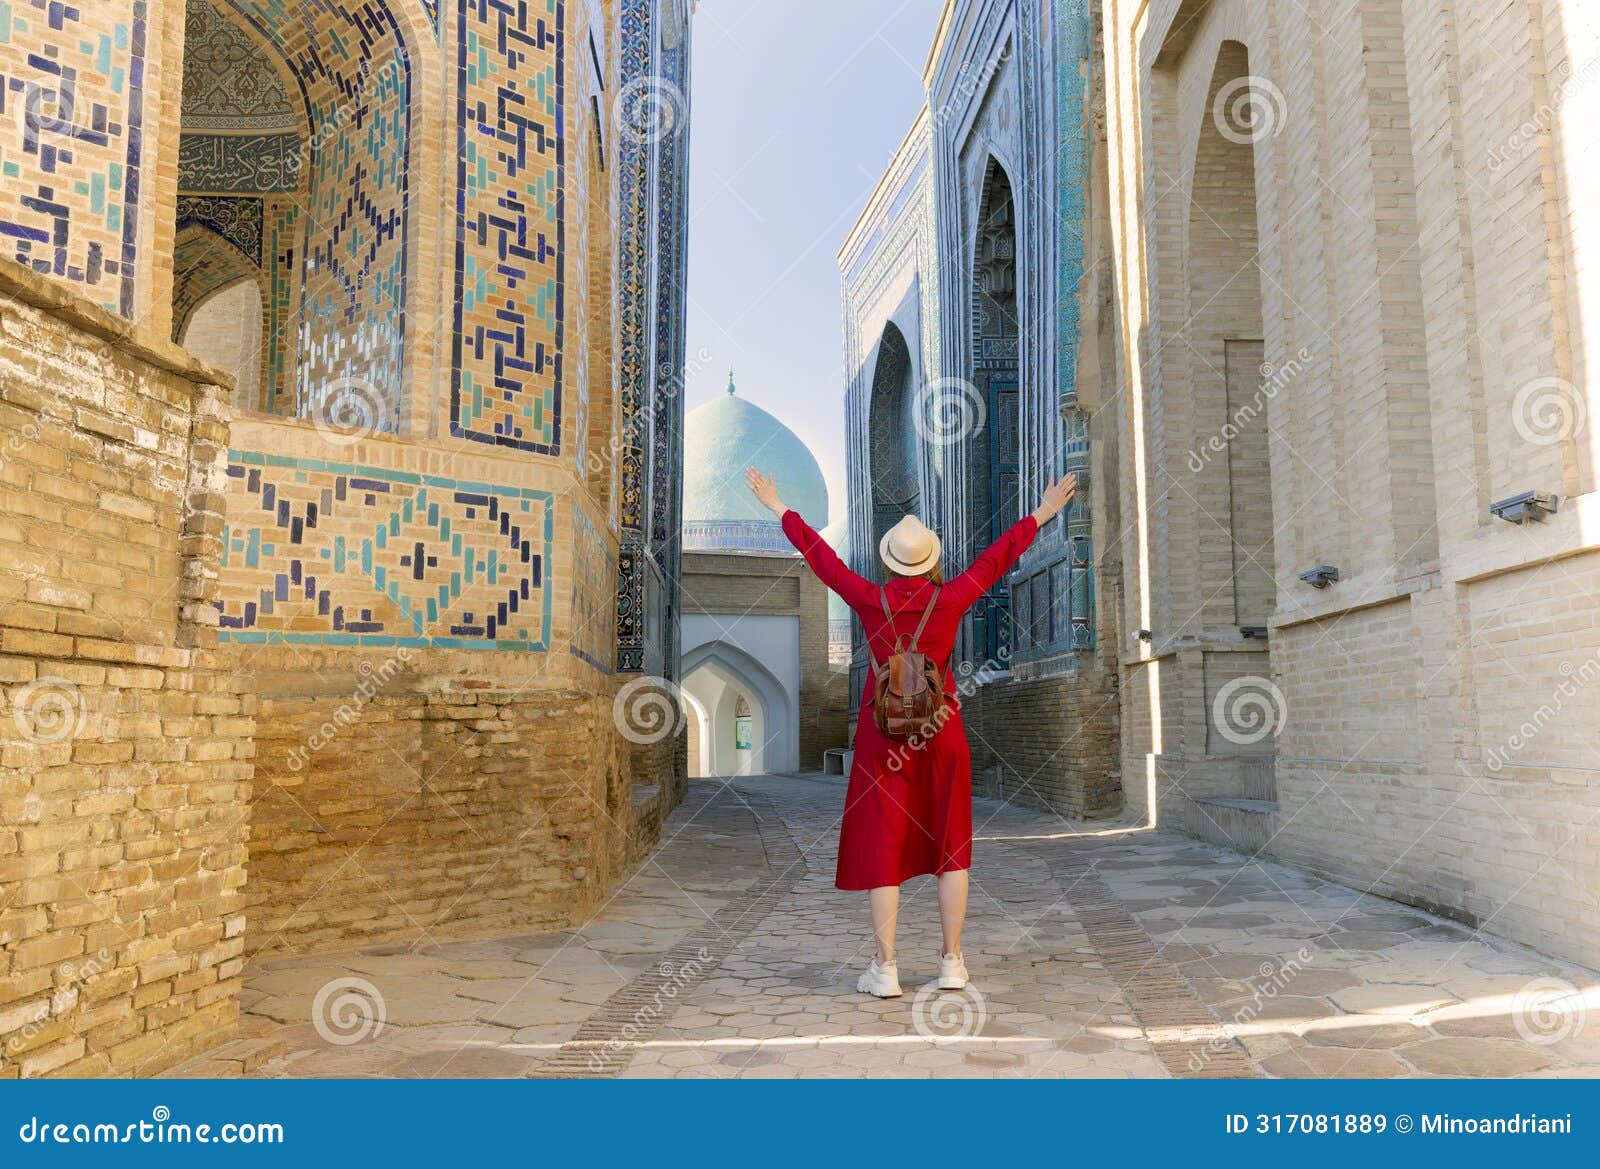 tourist woman in red dress clothes stands in the shah-i-zinda ensemble in samarkand, uzbekistan